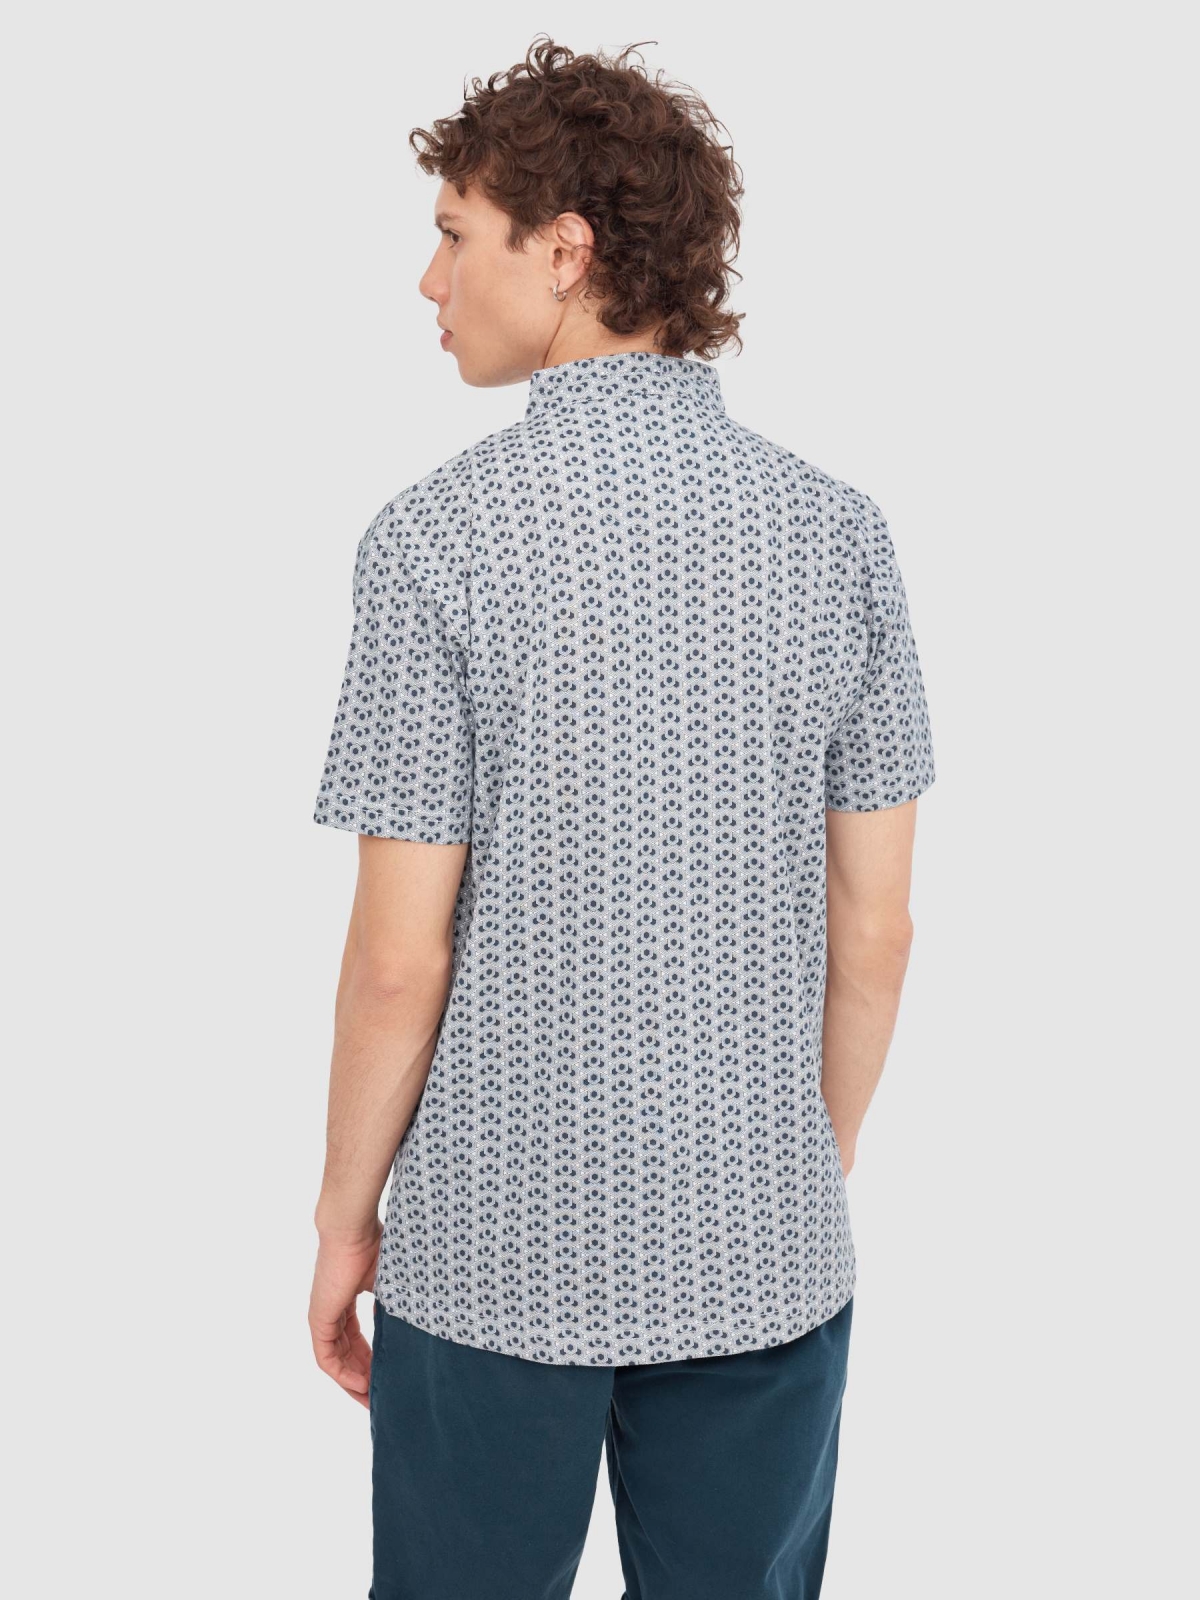 Mao geometric polo navy middle back view